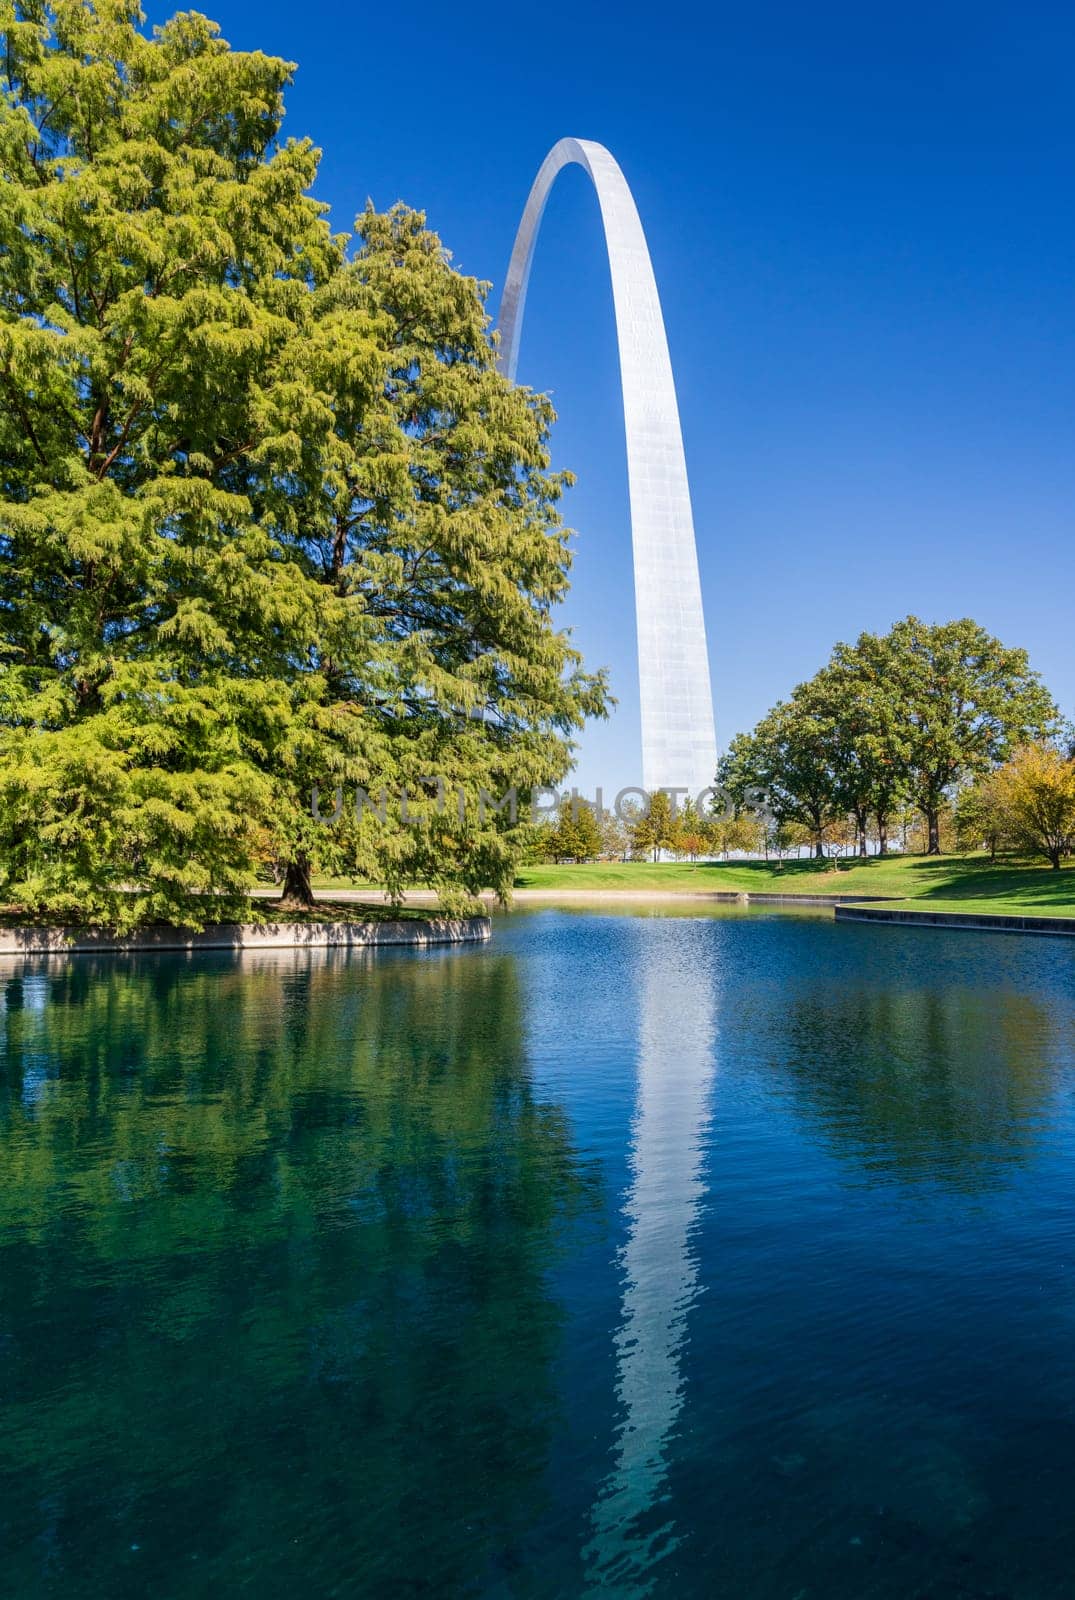 Gateway Arch of St Louis Missouri reflecting in the lake by steheap